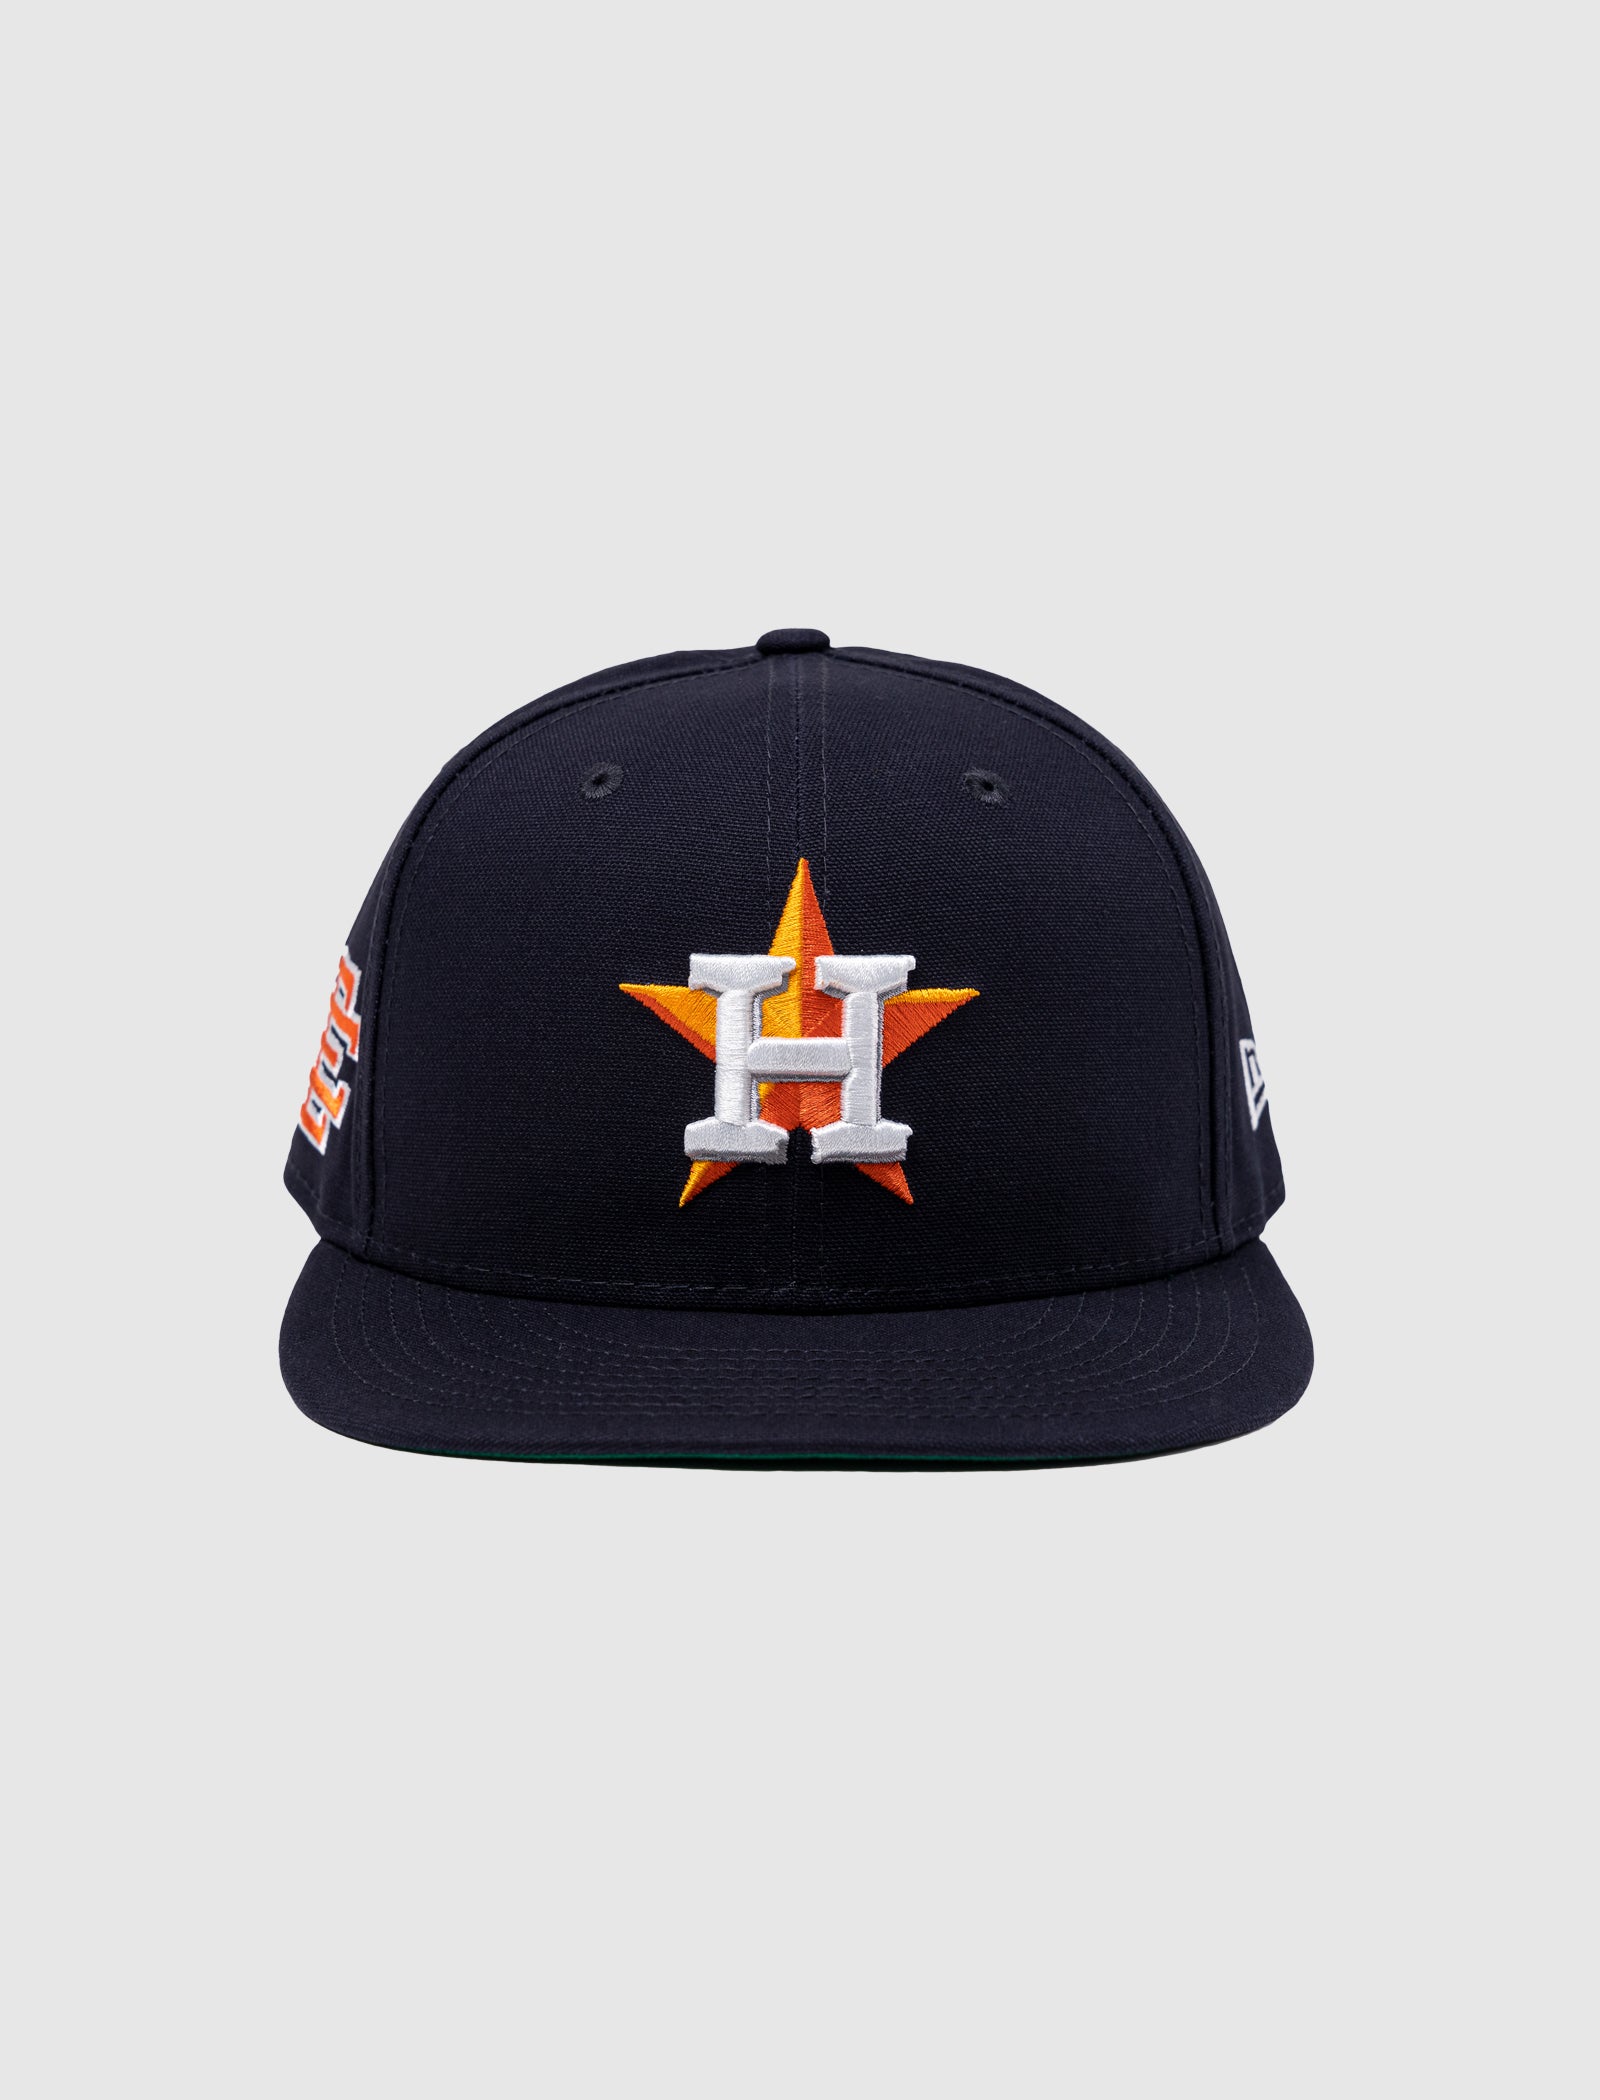 Houston Astros - new era 2017 World Series champions patch fitted hat. 7  5/8